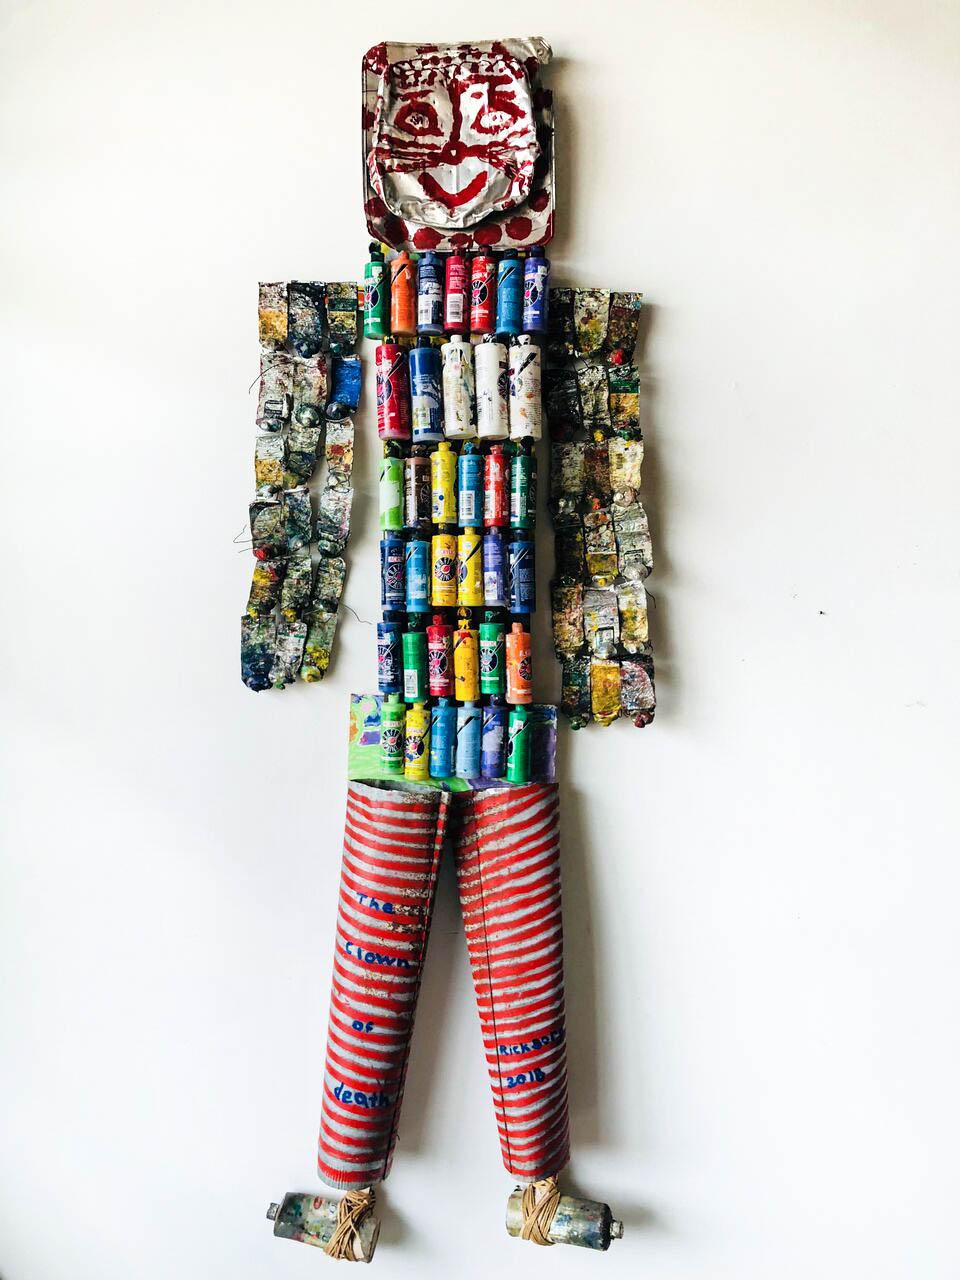 The Clown of Death with Found Objects//Folk Art - Mixed Media Art by Rick Borg